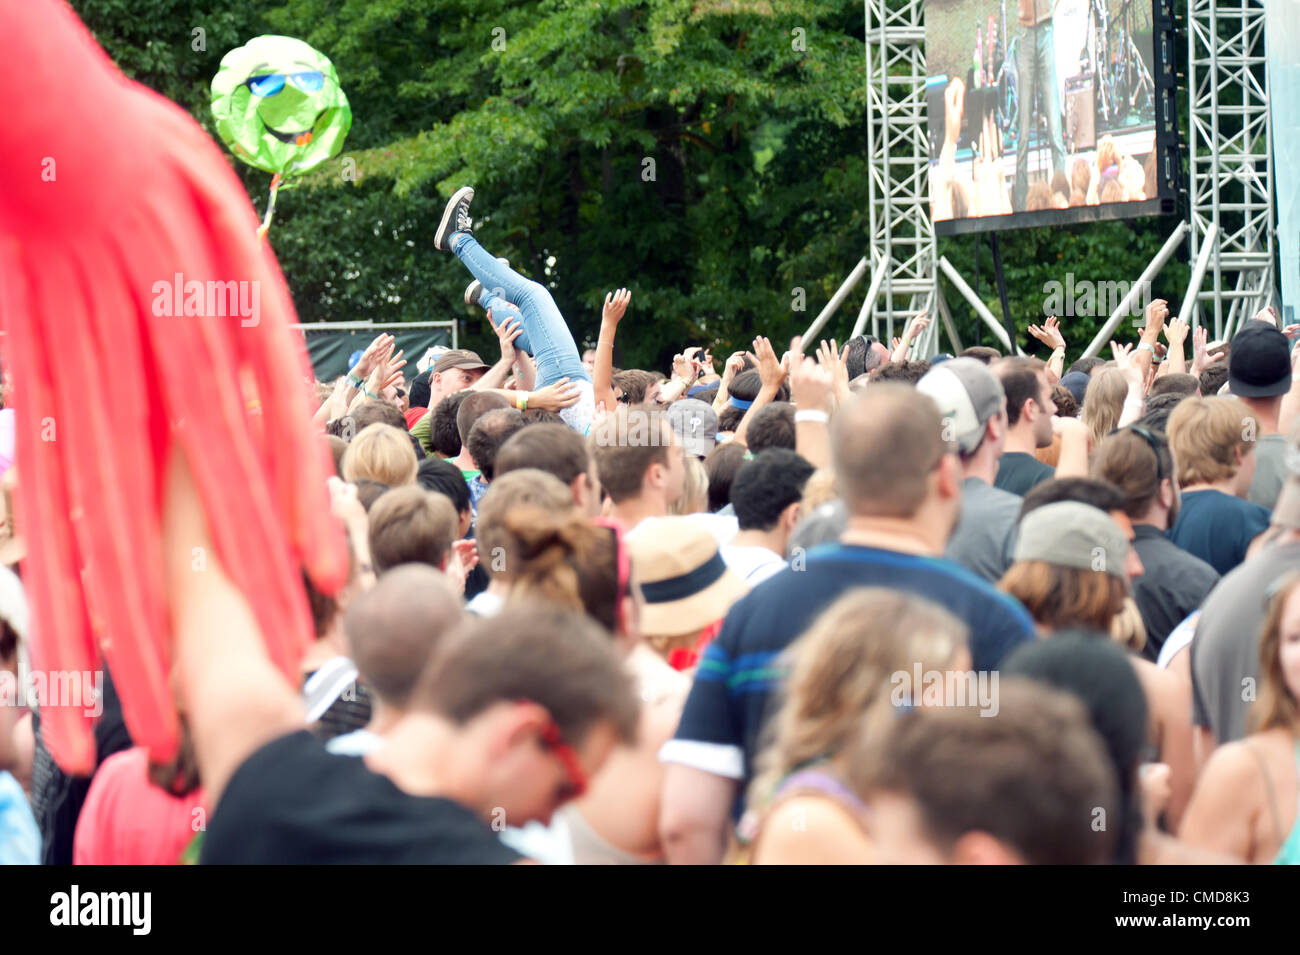 A young girl begins to fall while body / crowd surfing at the Firefly Music Festival in Dover, Delaware, United States Stock Photo